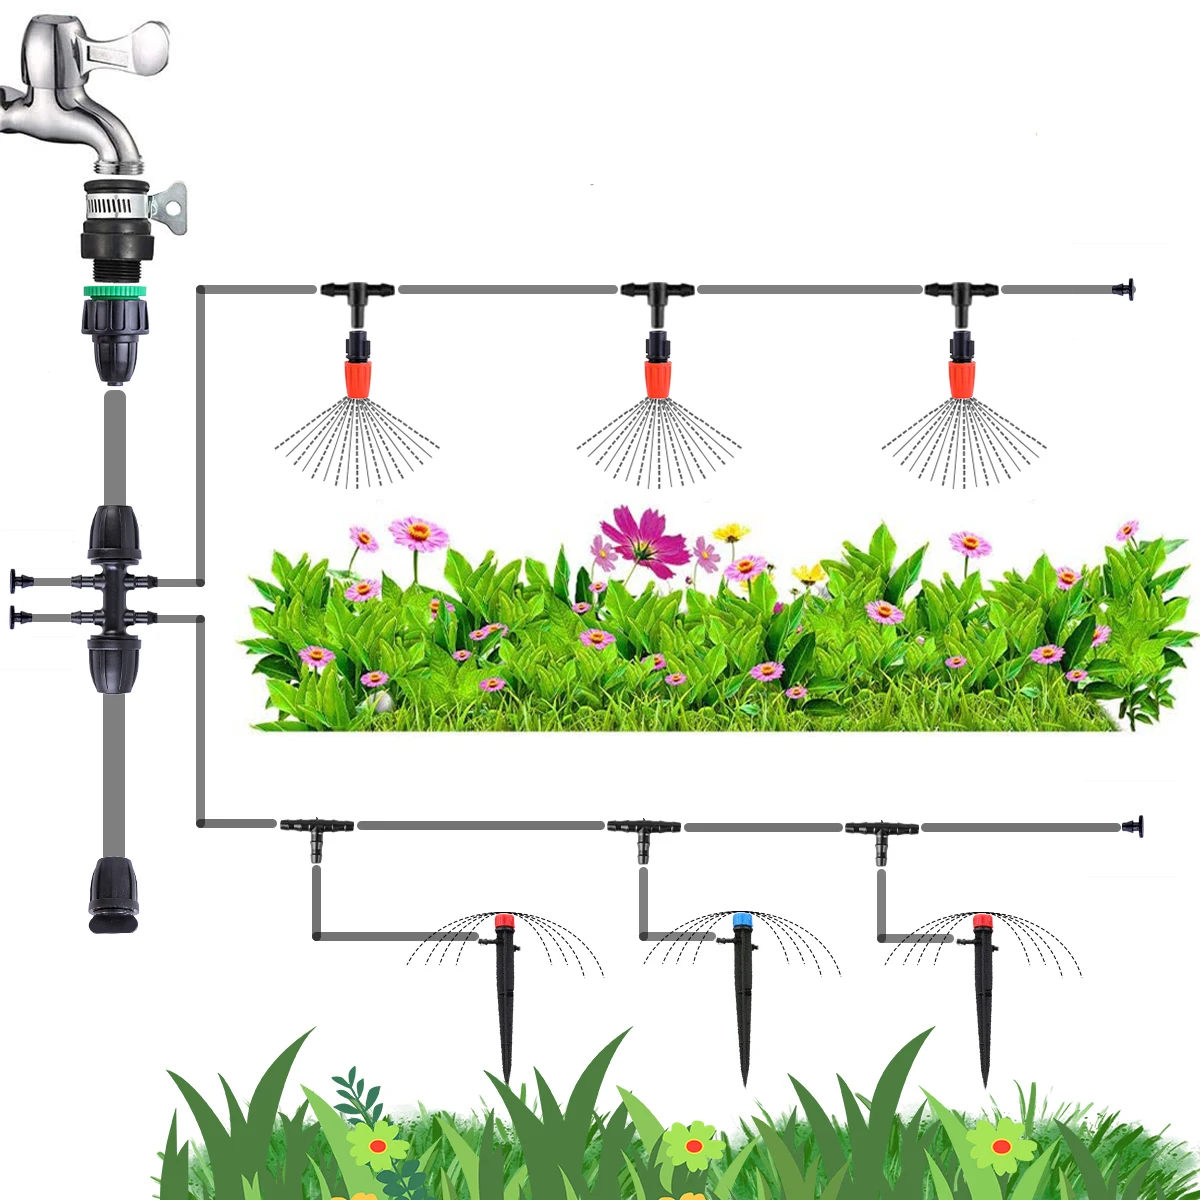 

242pcs Drip Irrigation Kits Garden Watering System Automatic Plant Watering Kit Misting Cooling System for Greenhouse Lawn, As shown